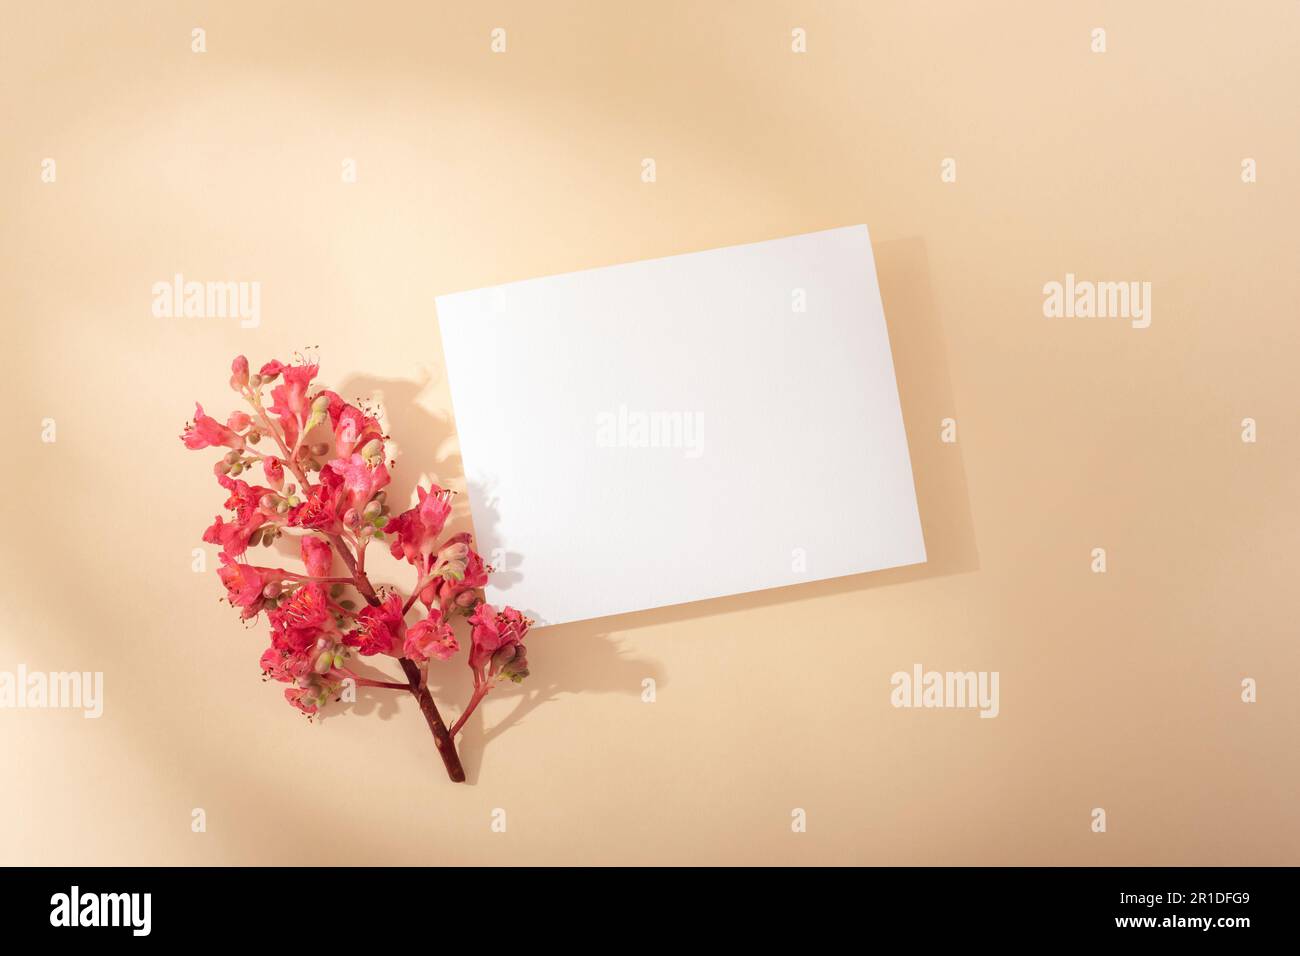 Blank card and Aesculus Carnea flower on neutral background with shadows. Holiday concept. Top view, flat lay, mockup. Stock Photo